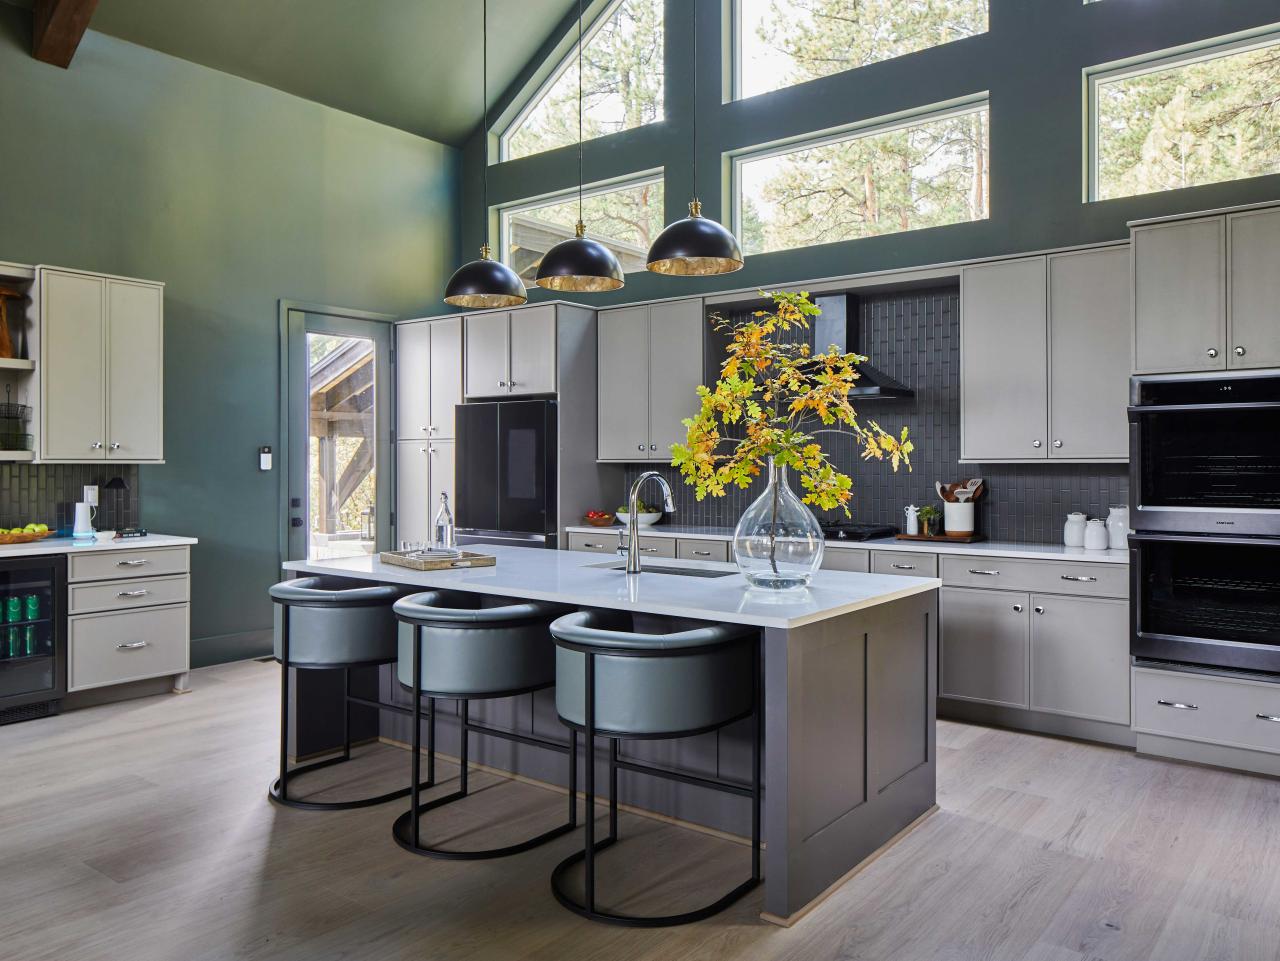 Tour the Stunning Kitchen from Dream Home 2022